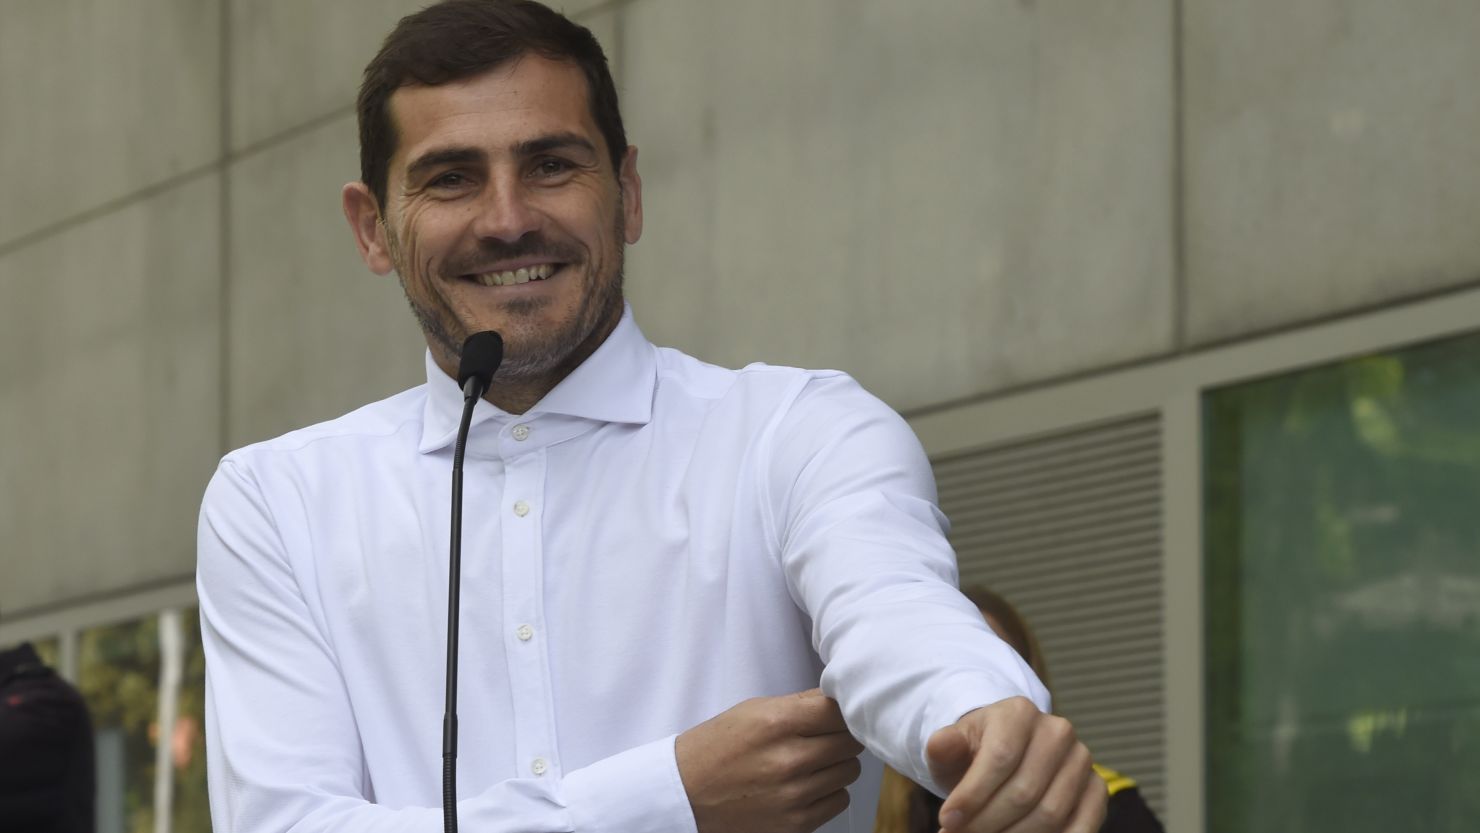 Iker Casillas smiles as he addresses journalists after leaving a hospital in Porto on Monday.